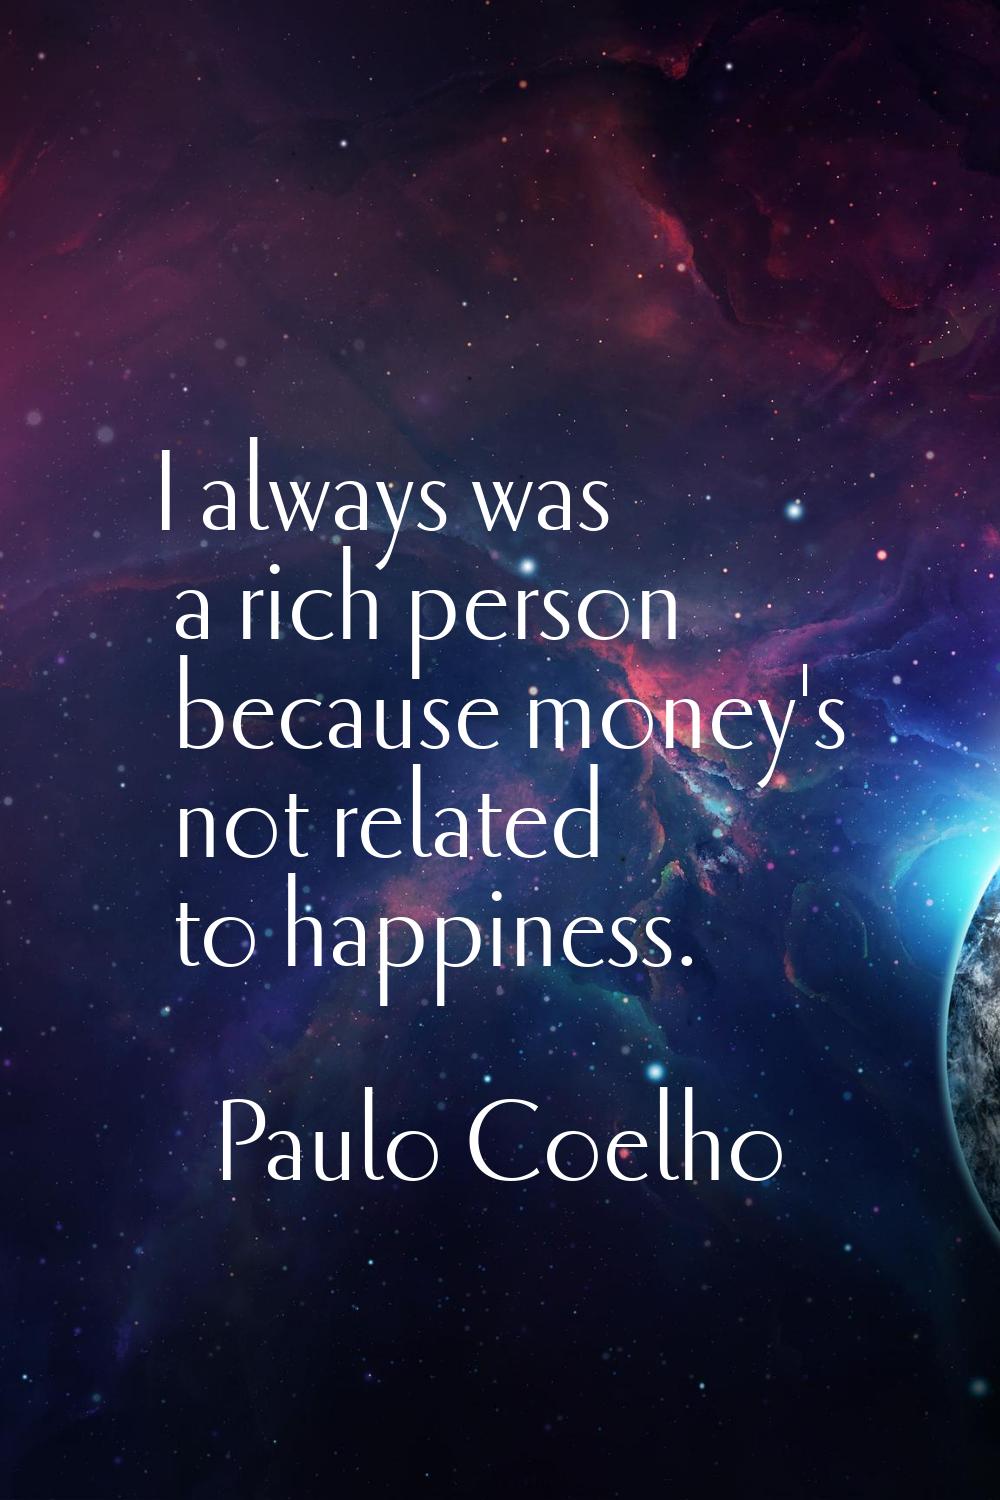 I always was a rich person because money's not related to happiness.